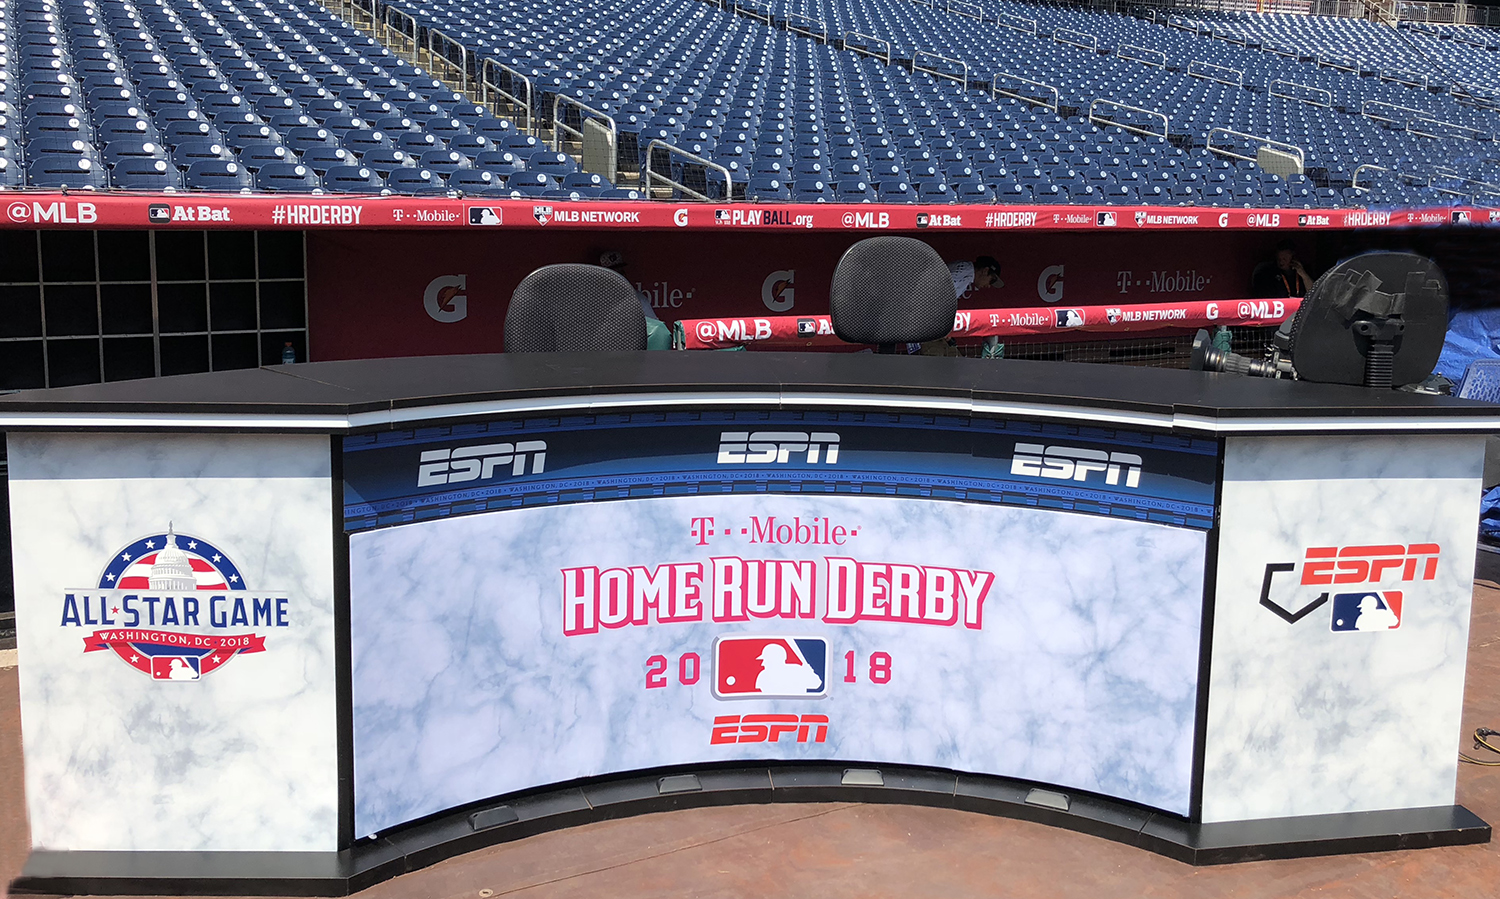 Live From MLB All-Star ESPN Adds New Dimensions to Home Run Derby With 4D Replay, 3D Spray Charts